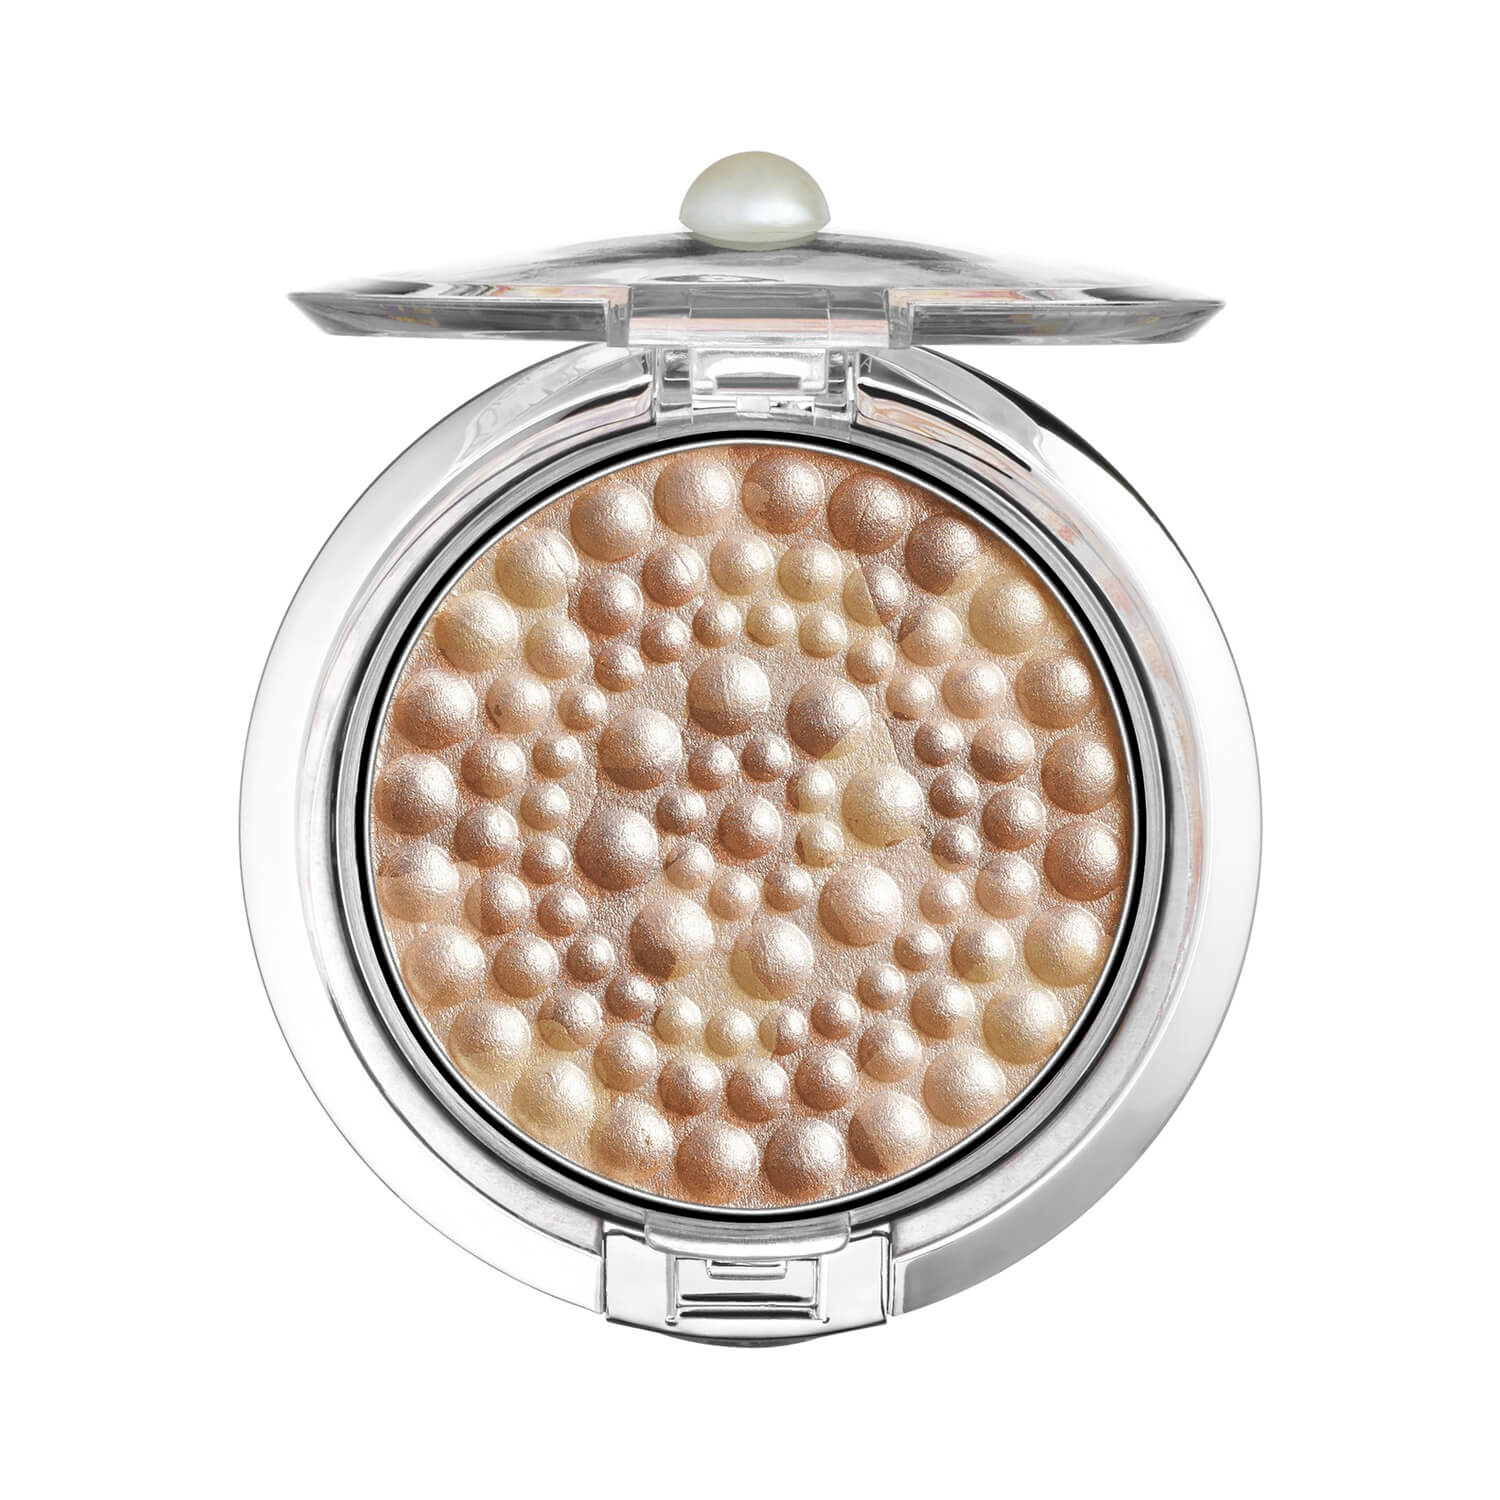 Physicians Formula Powder Palette Mineral Glow Pearls Light Bronze Pearl